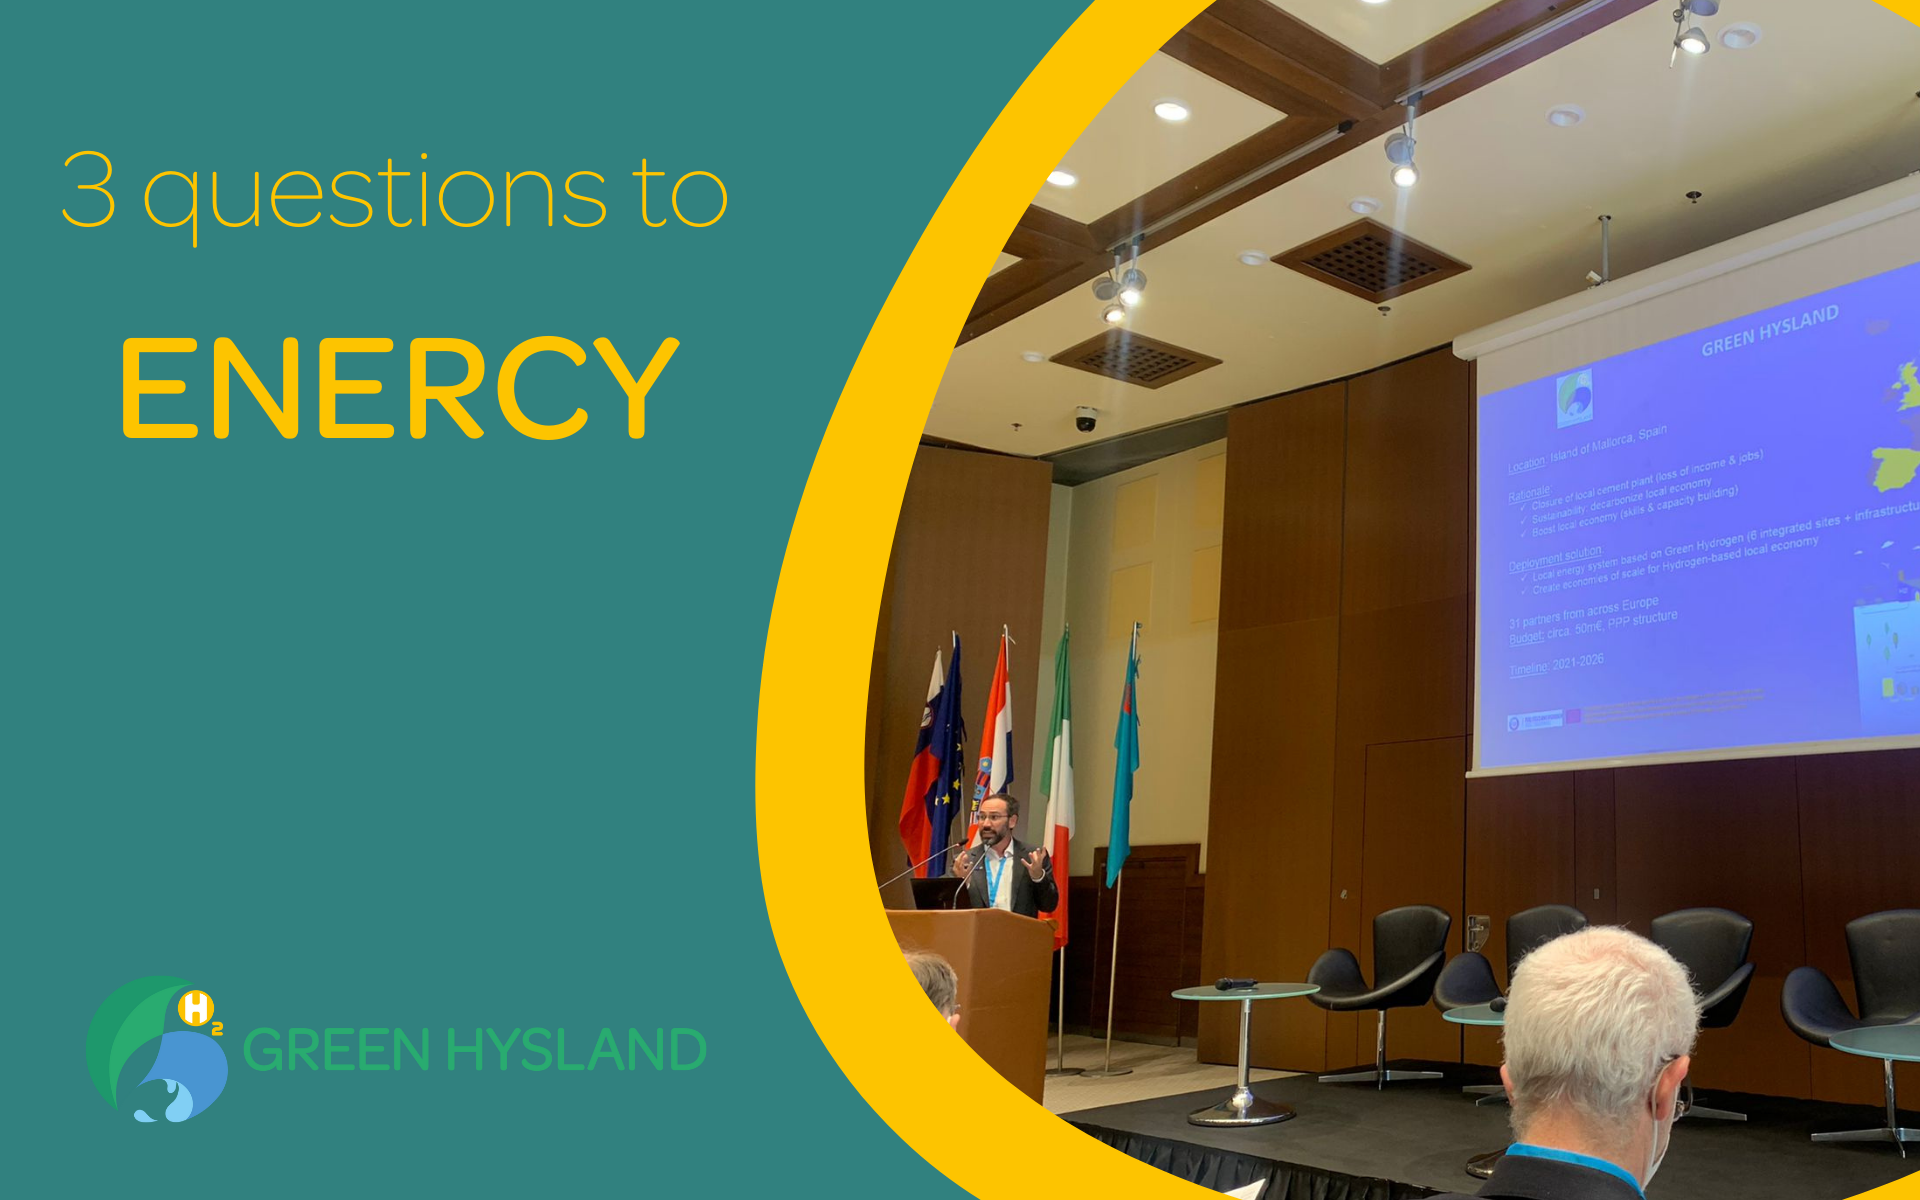 3 questions to Enercy